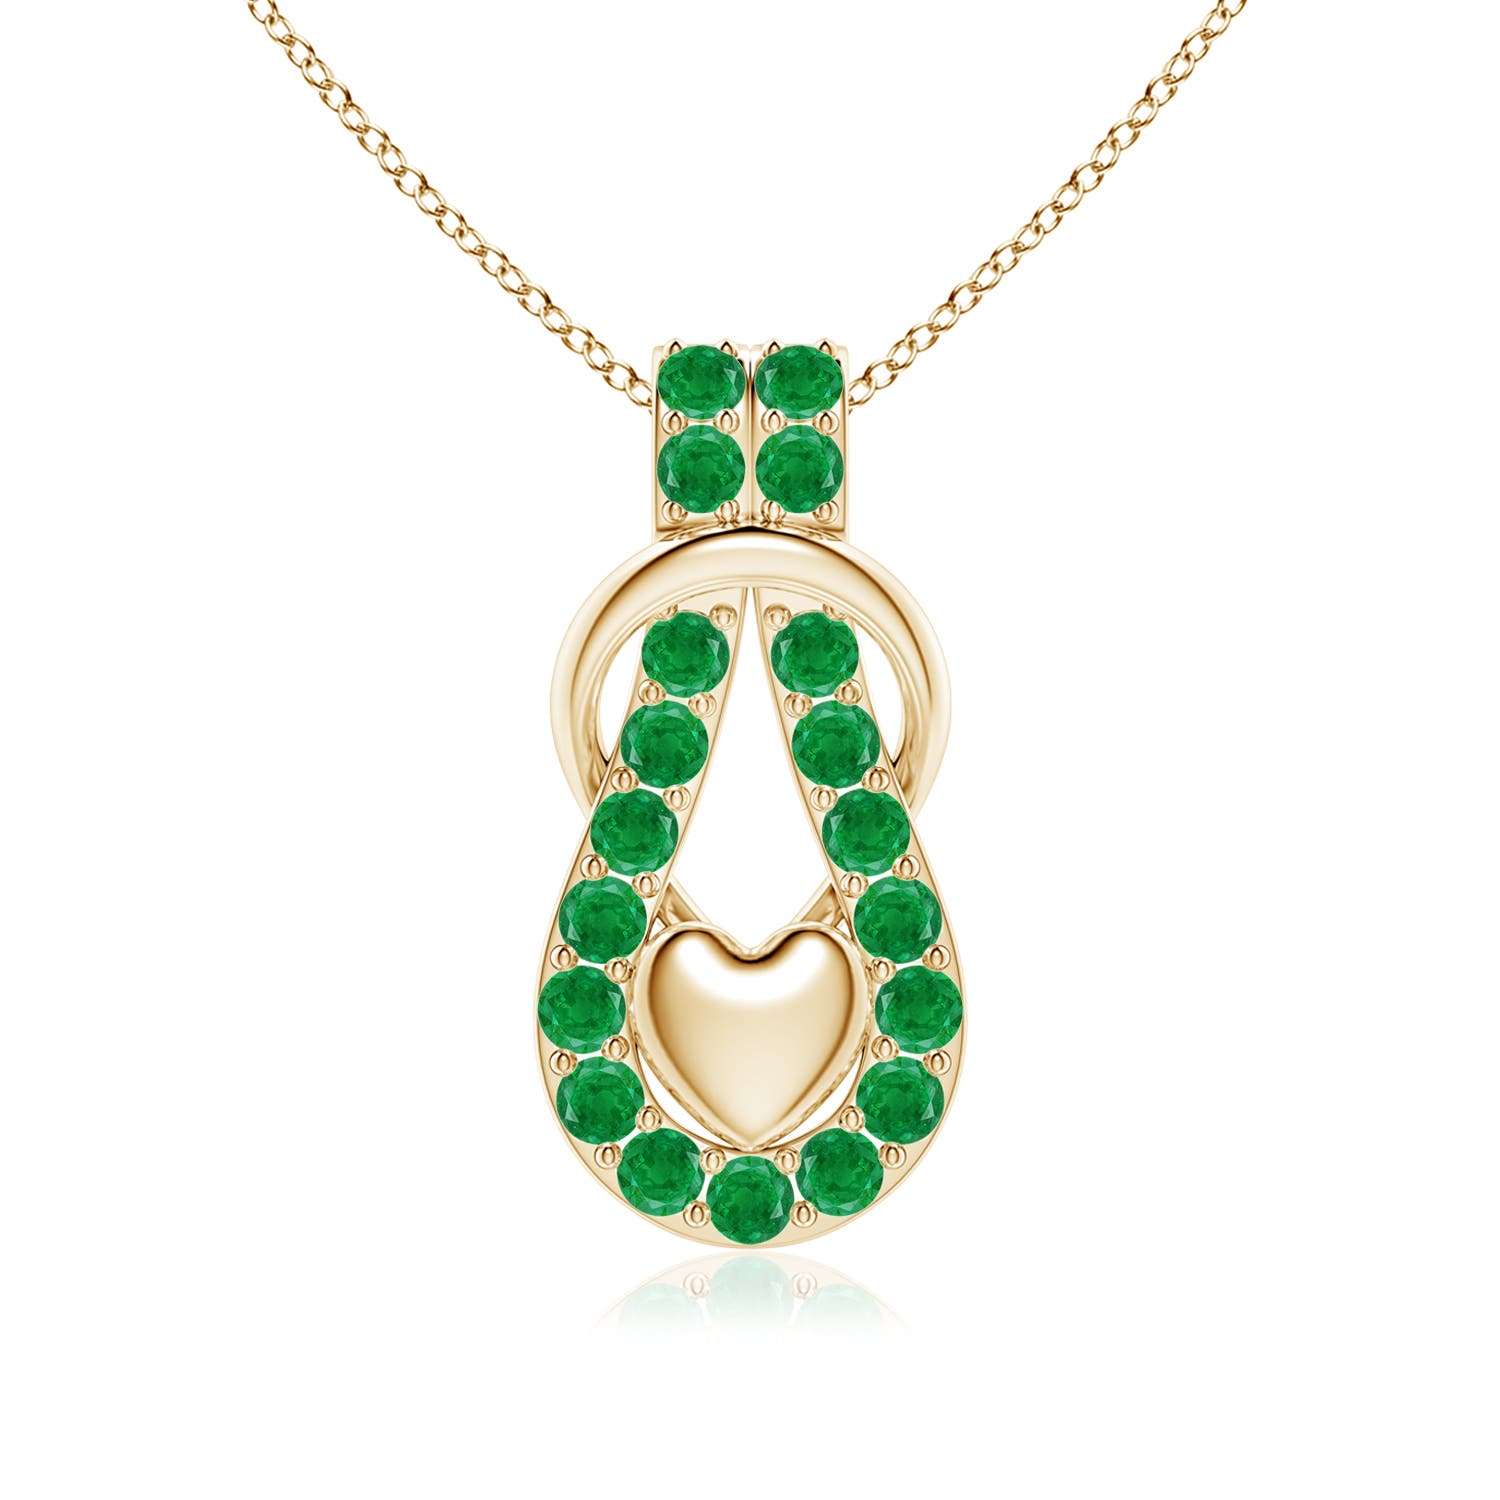 AA - Emerald / 1.9 CT / 14 KT Yellow Gold